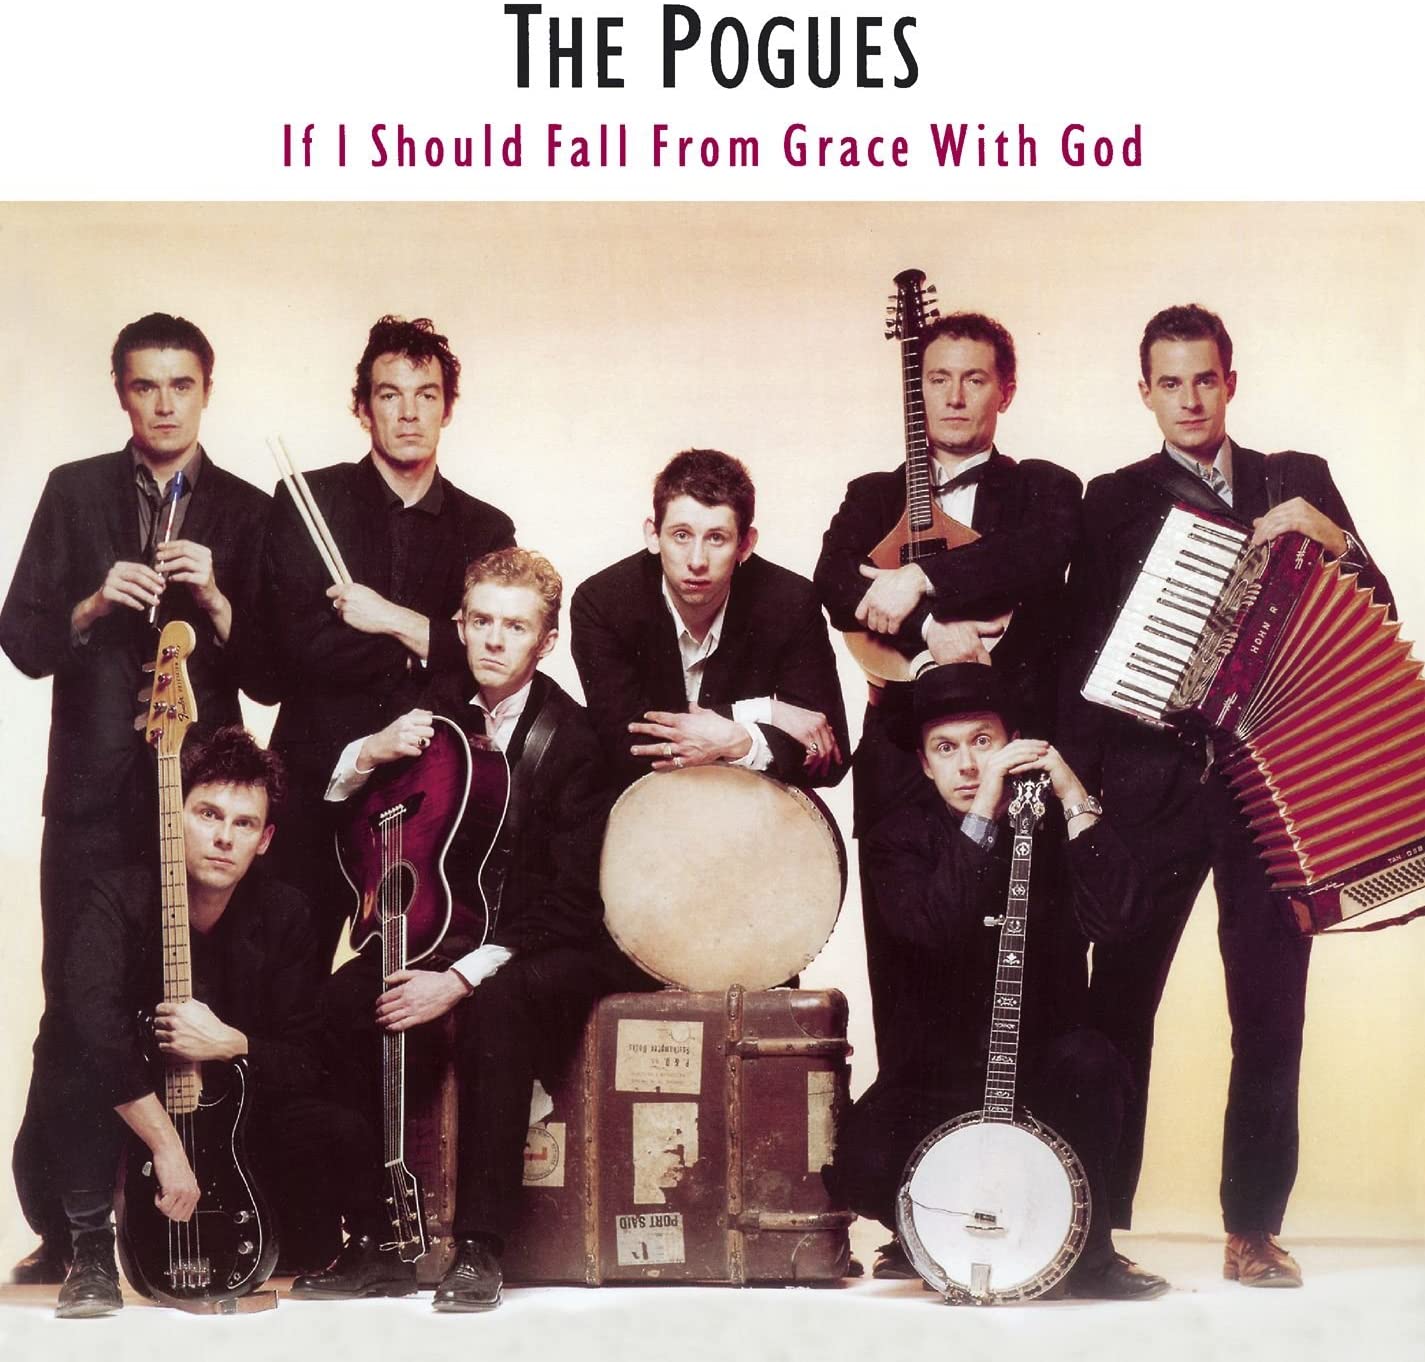 Pogues - If I Should Fall From Grace With God (Vinyl LP)